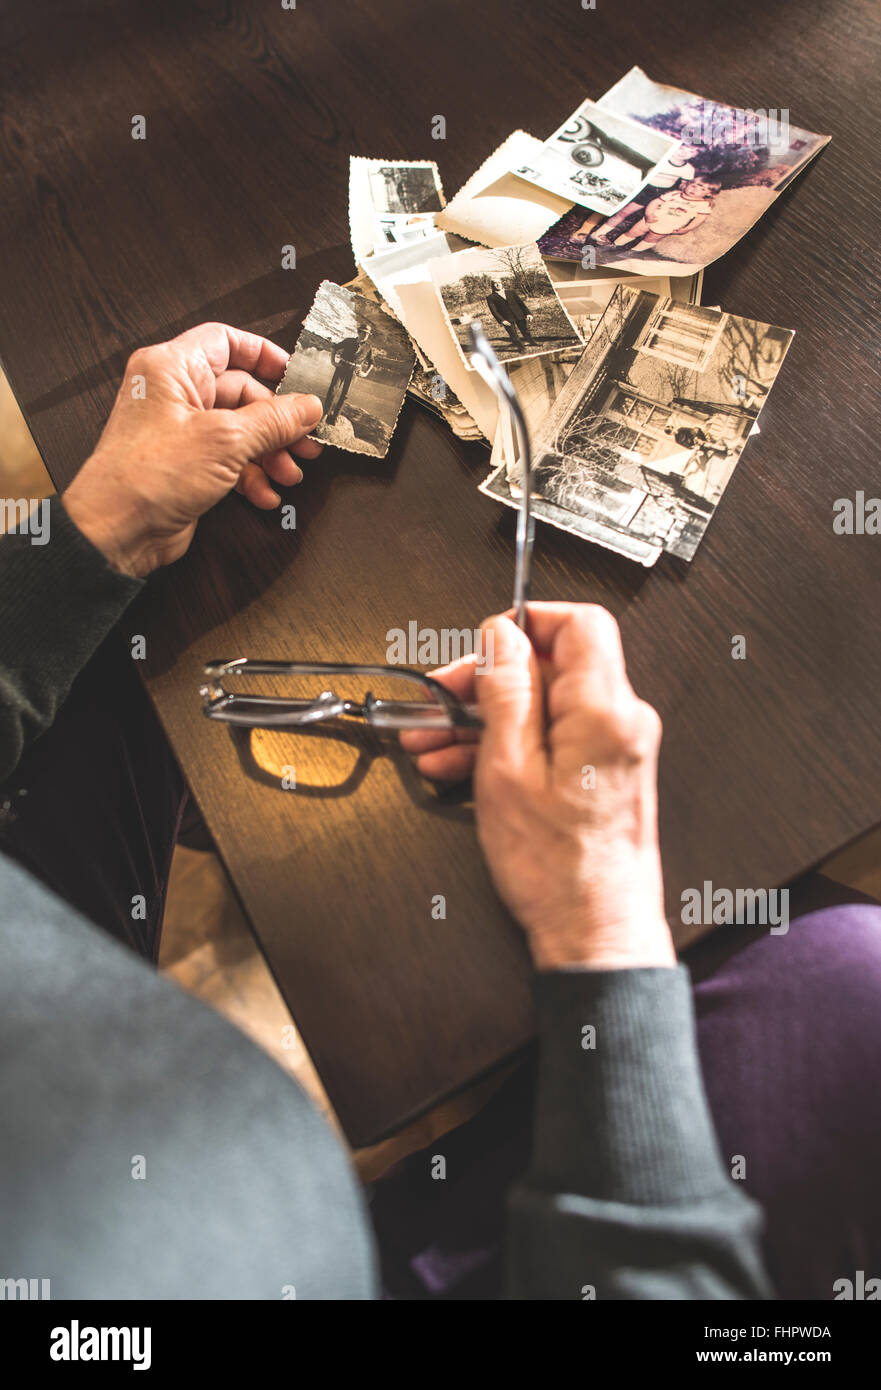 Hands of senior woman holding old photography and spectacles Stock Photo